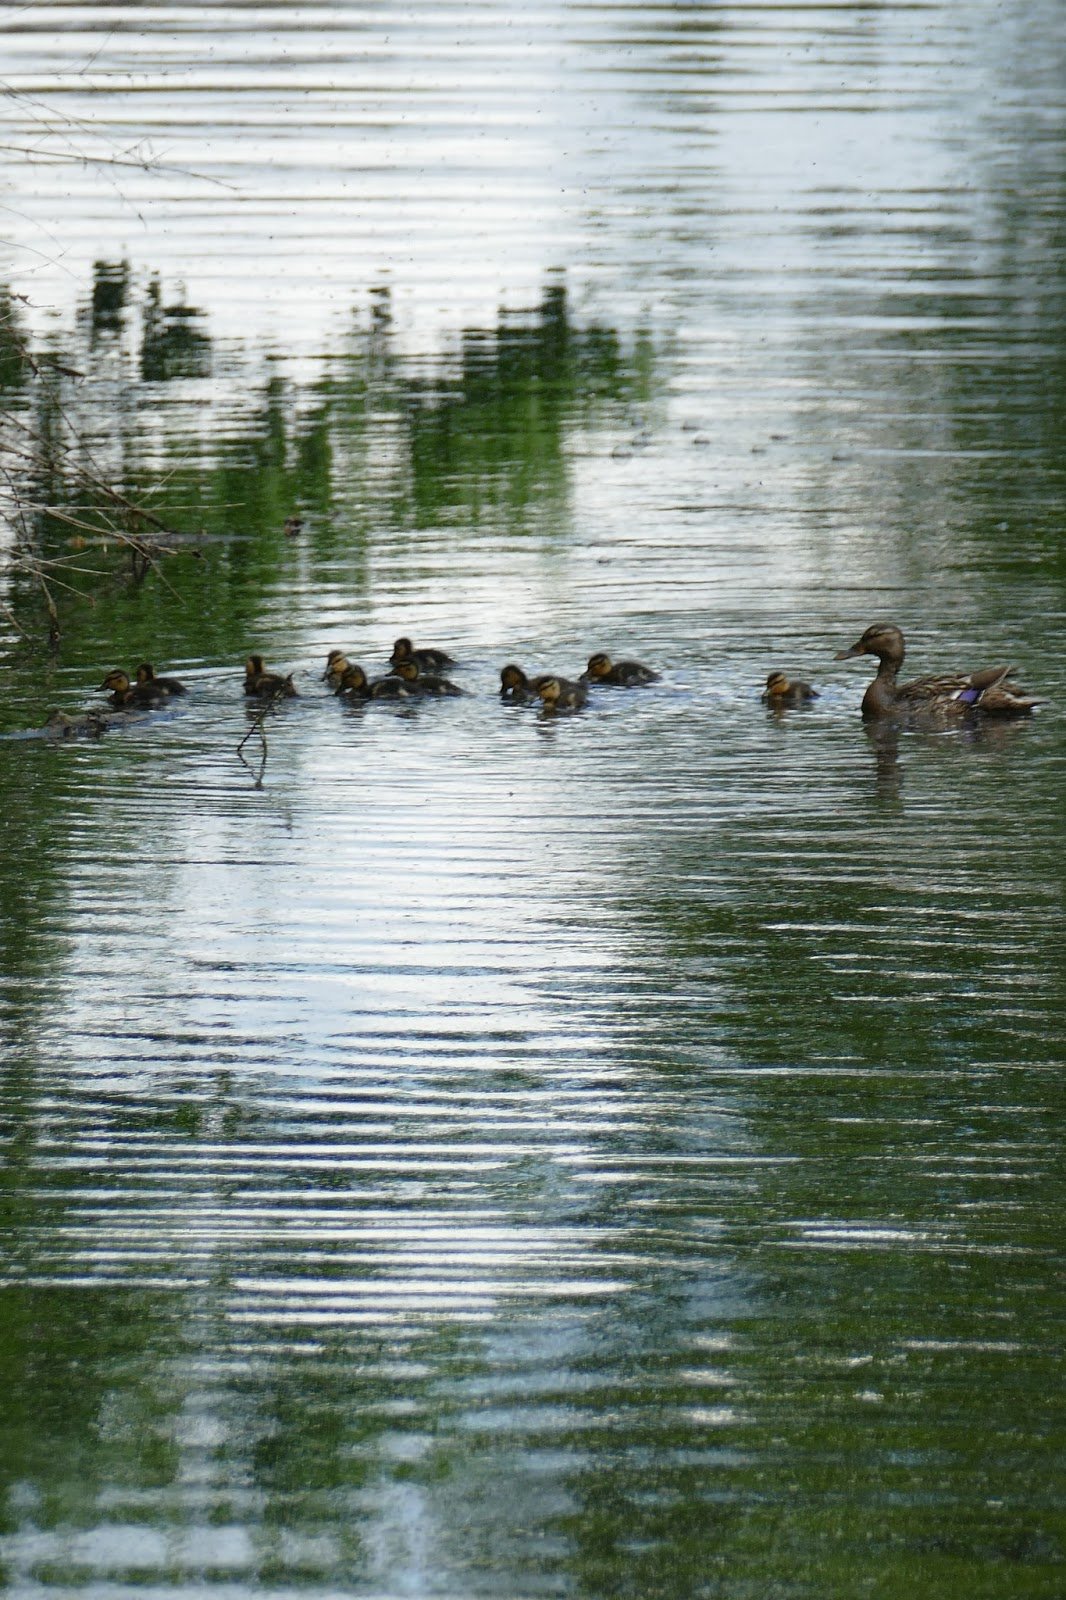 Duck and ducklings in a lake